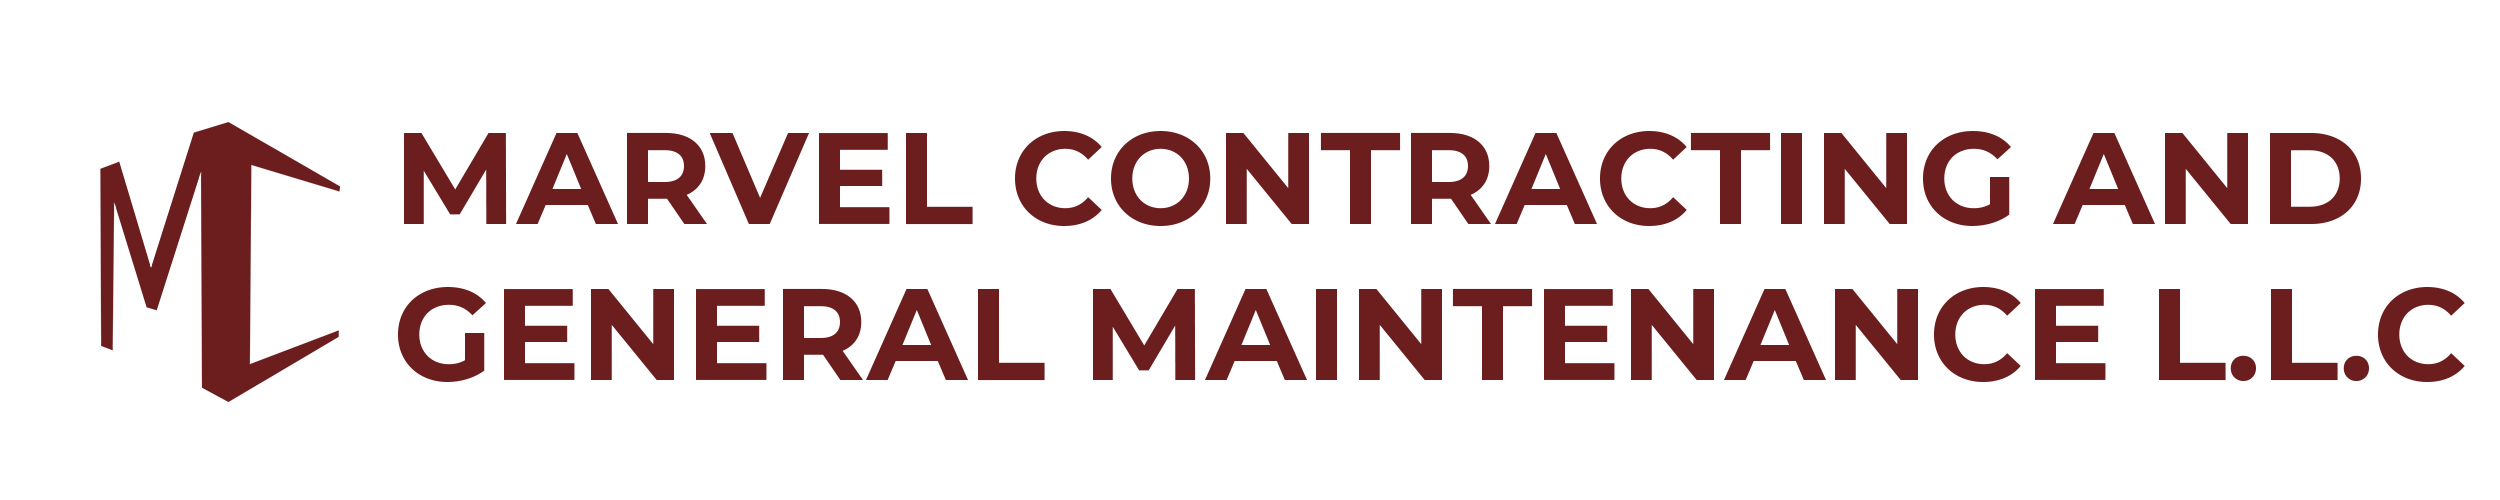 MARVEL CONTRACTING AND GENERAL MAINTENANCE LLC